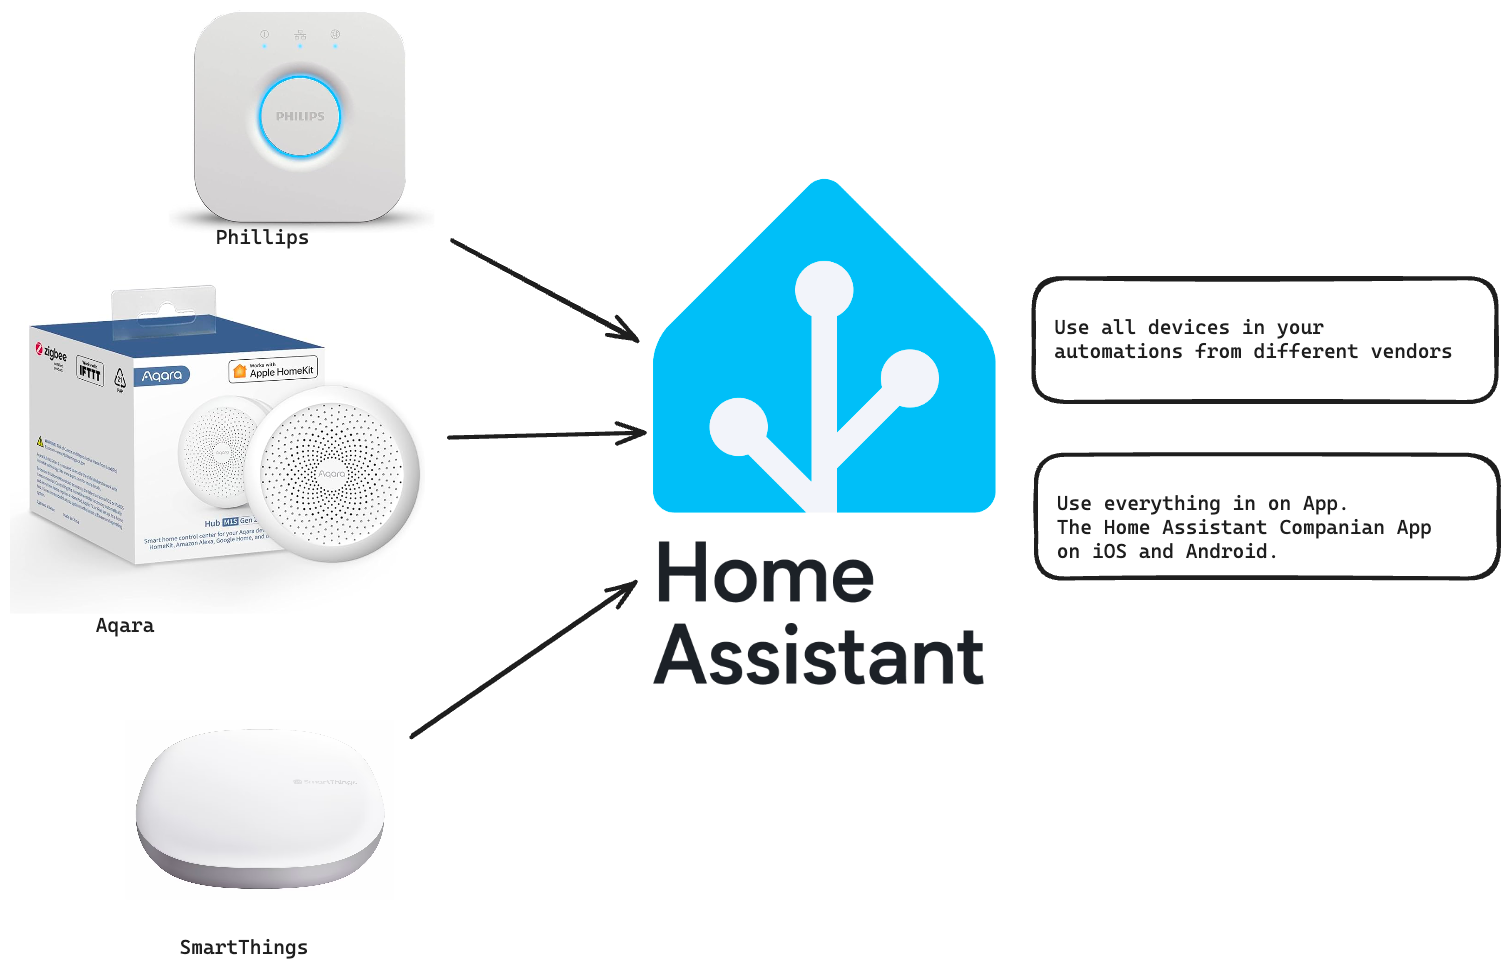 On the left different hubs from various vendors pointing to Home Assistant in the middle.